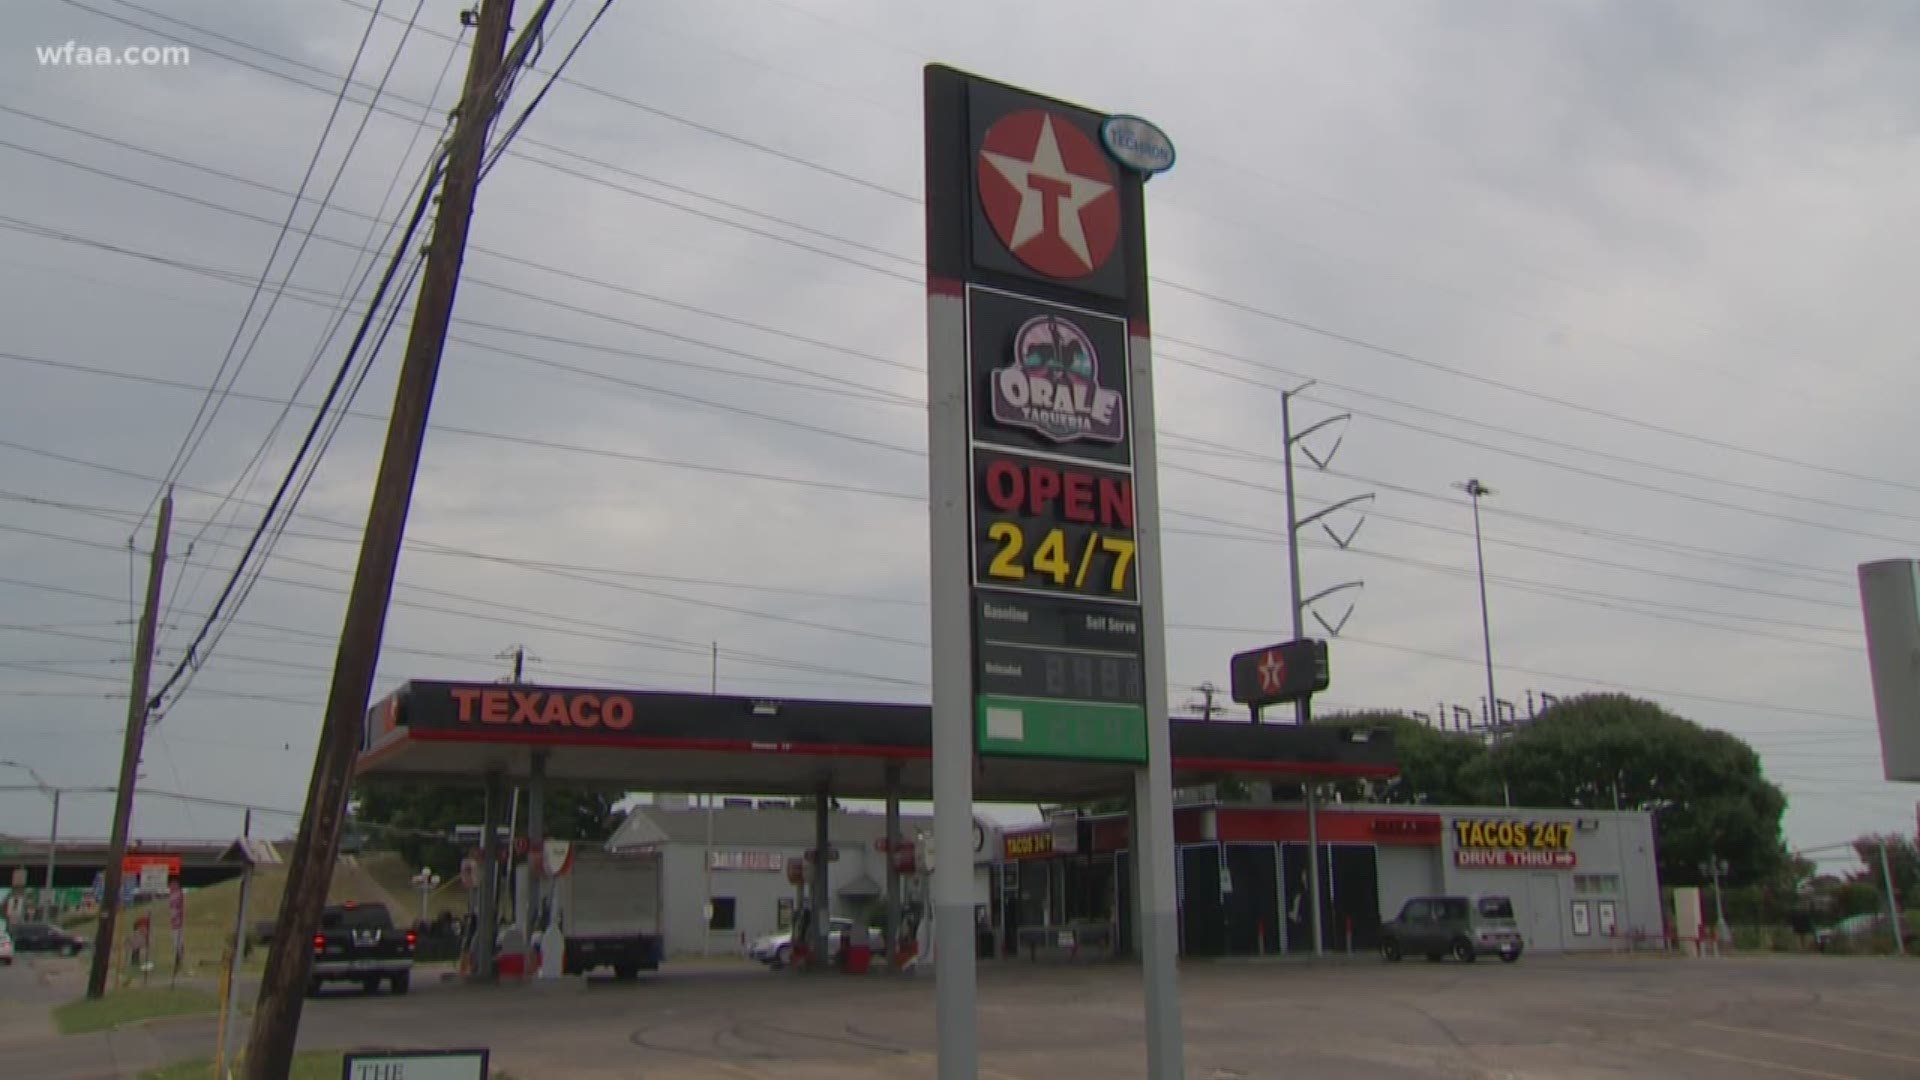 The family has not filed suit yet against the Texaco, but the City of Dallas has.